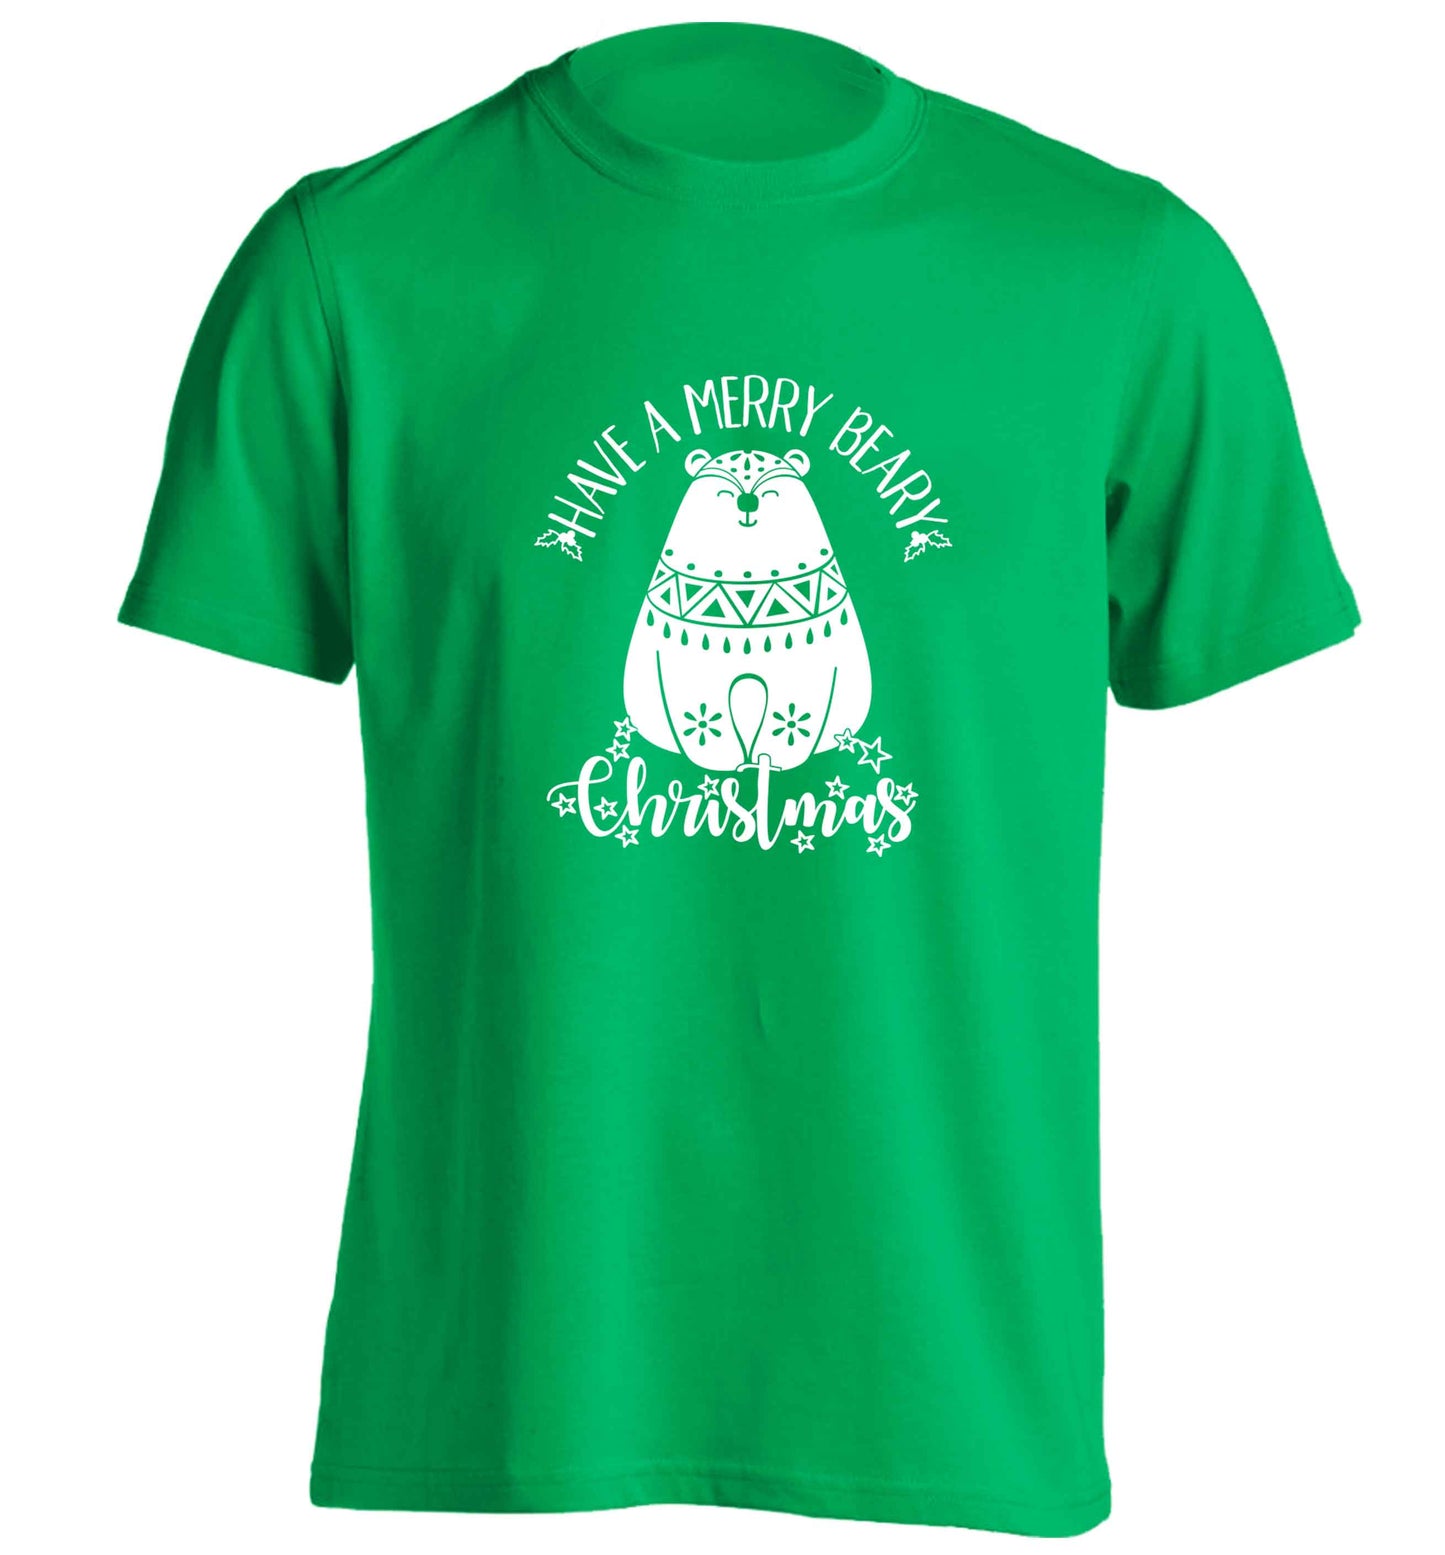 Have a merry beary Christmas adults unisex green Tshirt 2XL